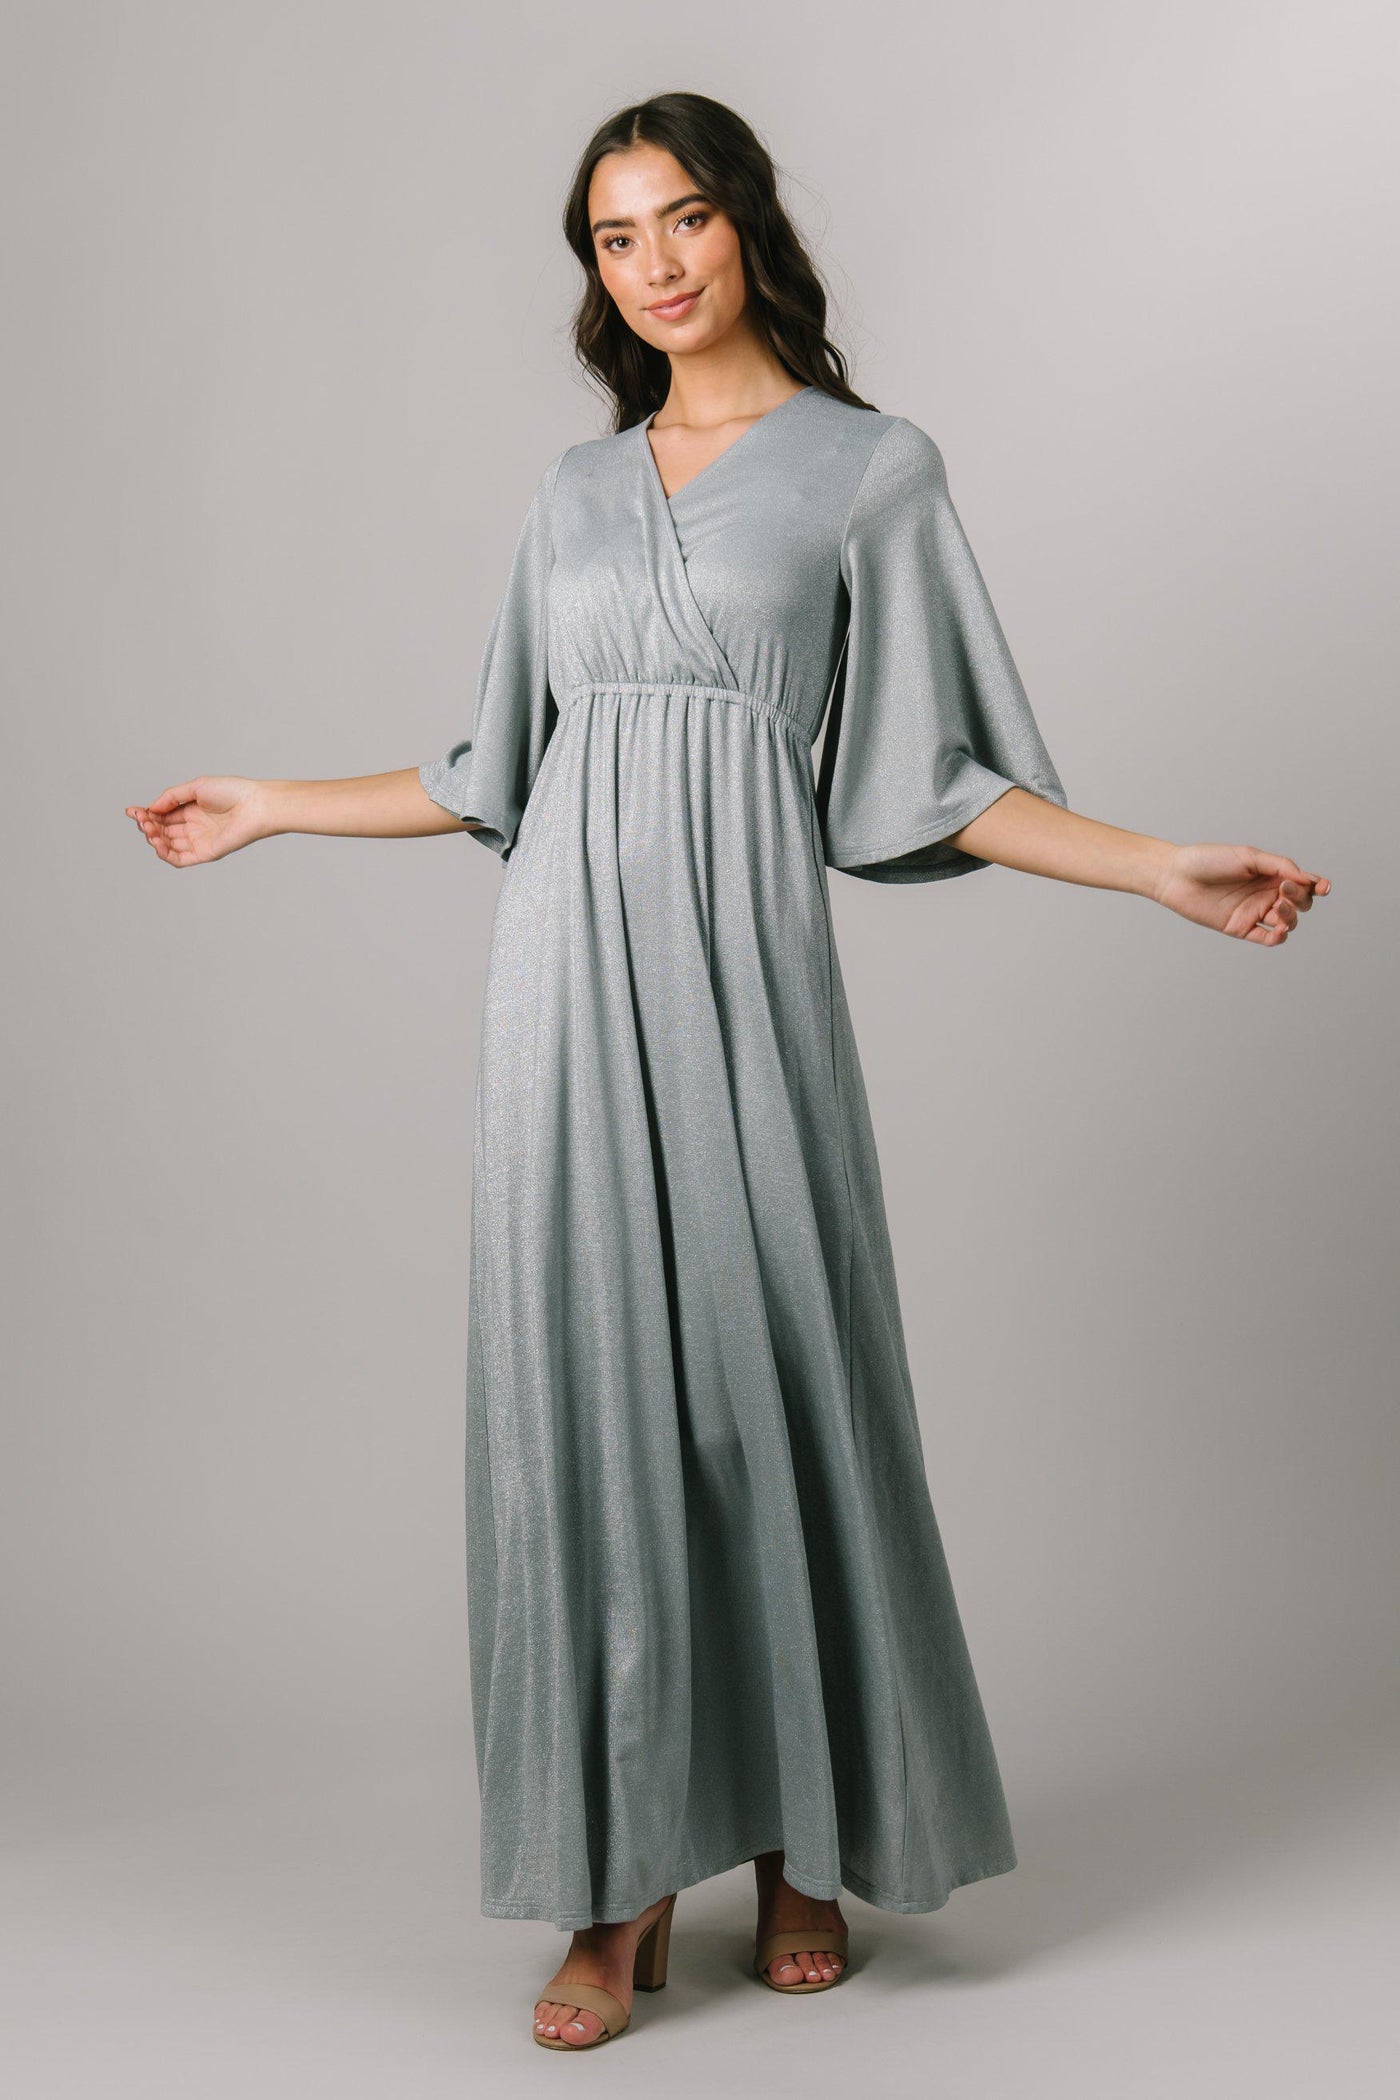  This Modest Dress shows off with a shimmer fabric, maxi length, and a wrap-like bodice. - Modest Dresses - Modest Clothing - Modest Bridesmaid Dresses